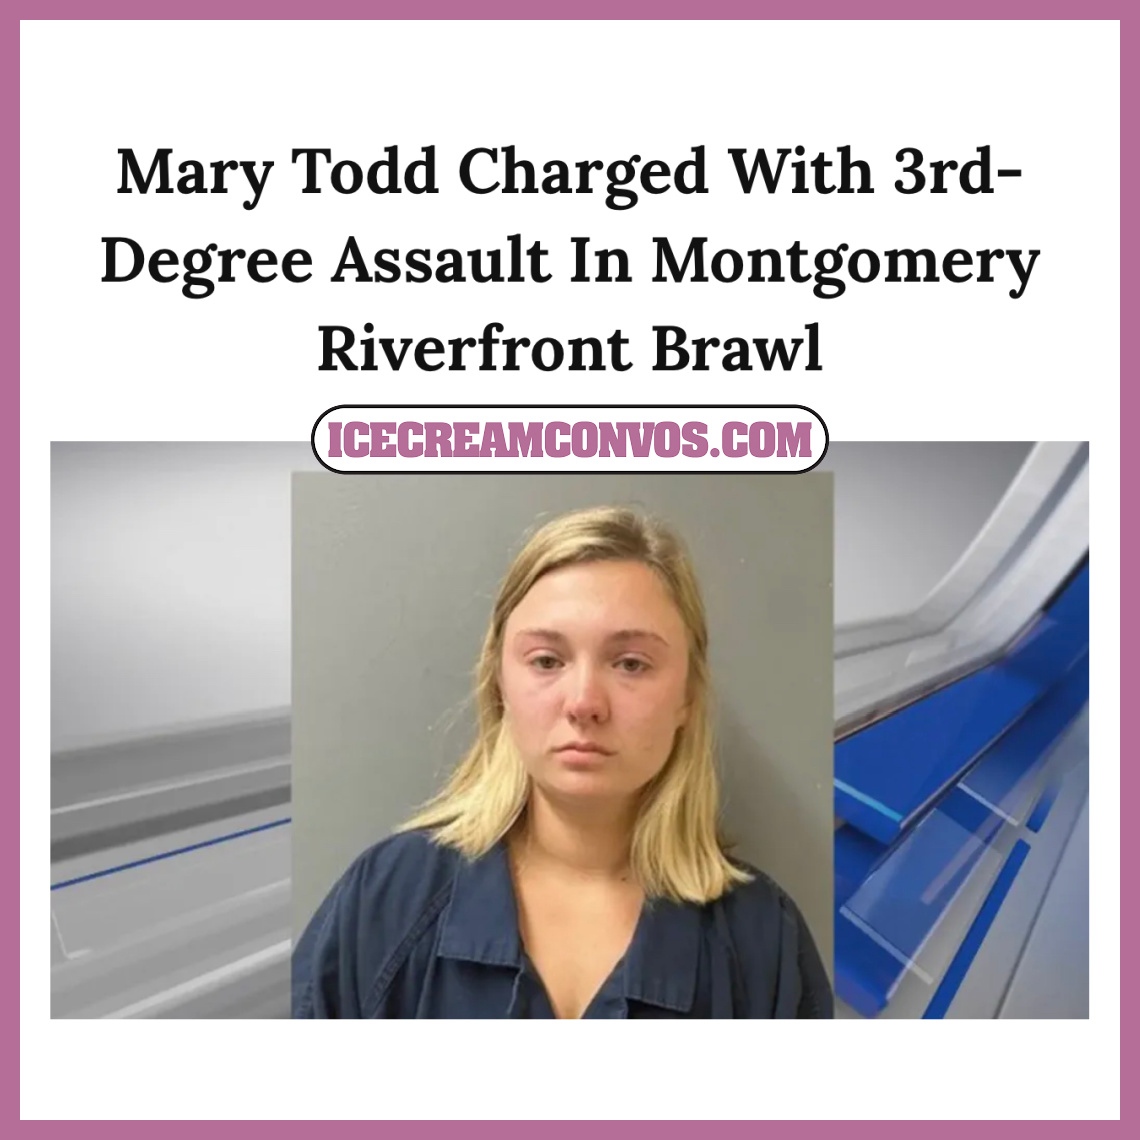 Mary Todd is the latest assailant to be charged with assault in connection to the Montgomery Riverfront brawl on Saturday, August 5. 🚨🍦

Get the scoop 👉🏾 bit.ly/44aruXD

#MaryTodd #Arrested #Montgomery #RiverfrontBrawl #RiverboatBrawl #IceCreamConvos